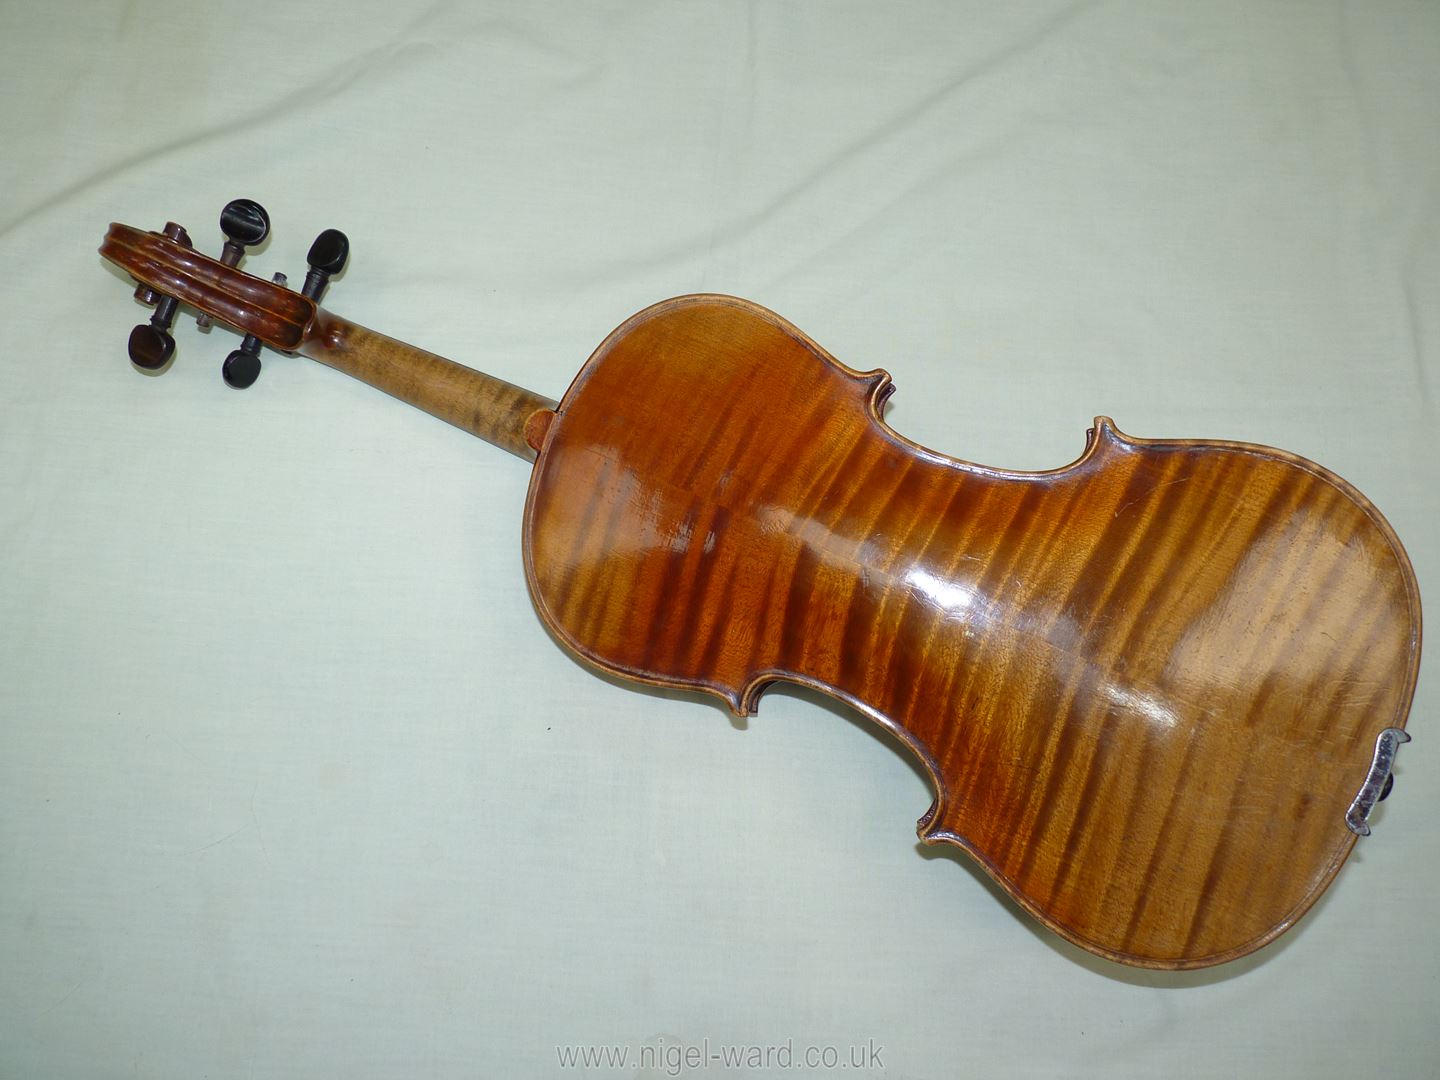 An antique violin having a well-carved scroll and nicely figured body including the back, - Image 5 of 49